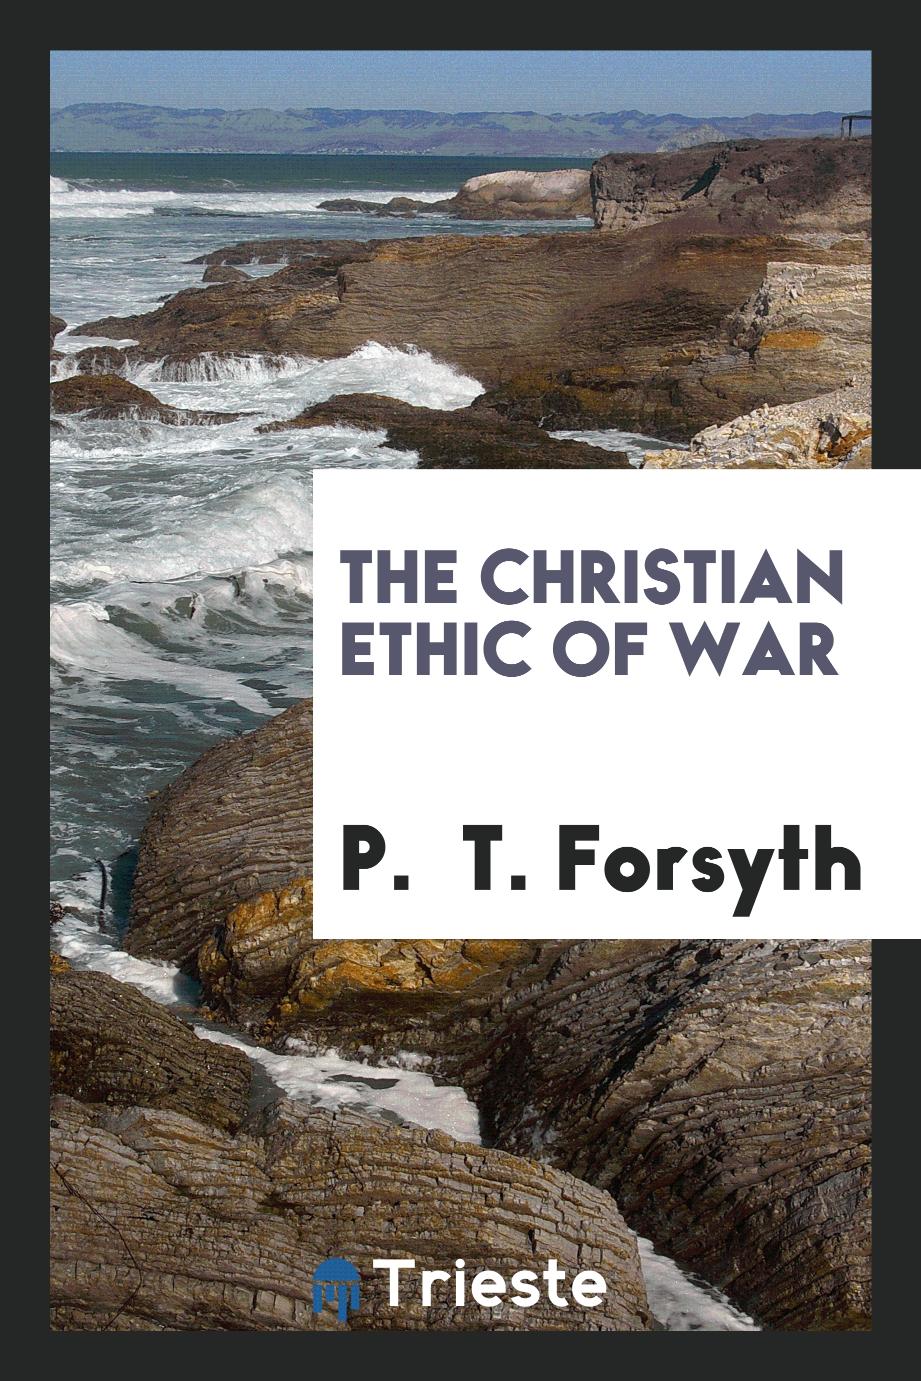 The Christian ethic of War